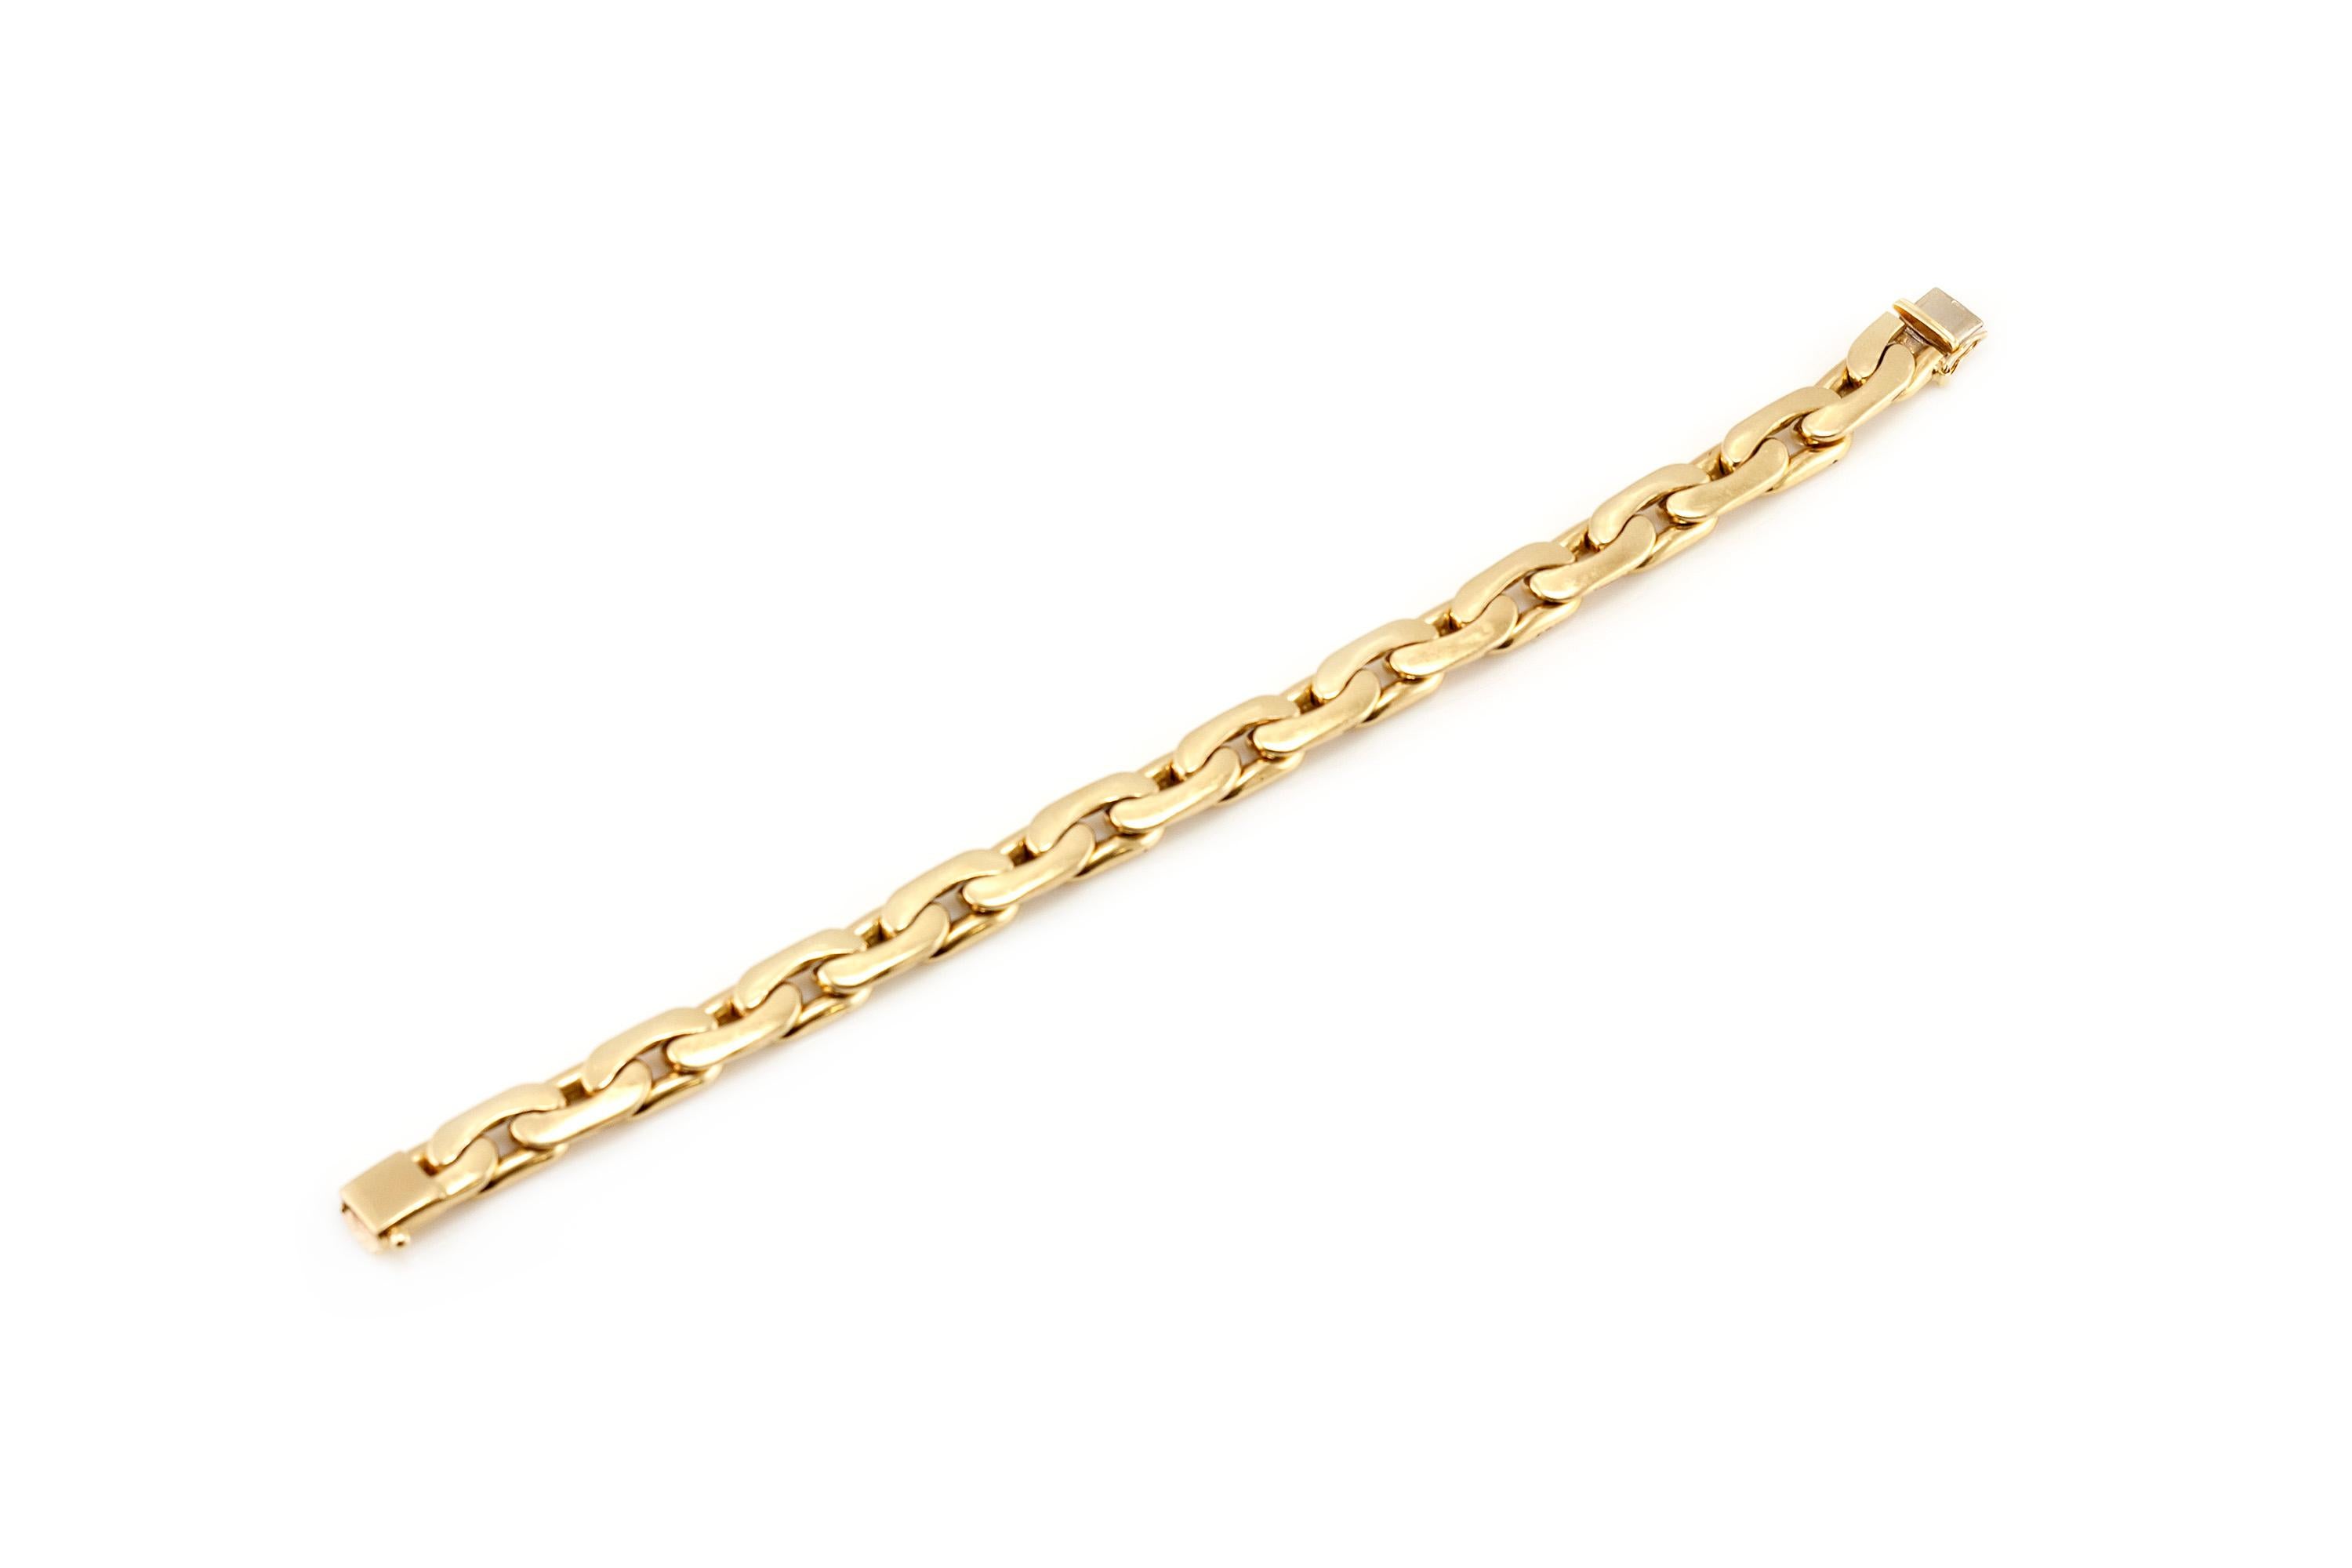 Finely crafted in 14K yellow gold.
Made in Italy
8 1/4 inches